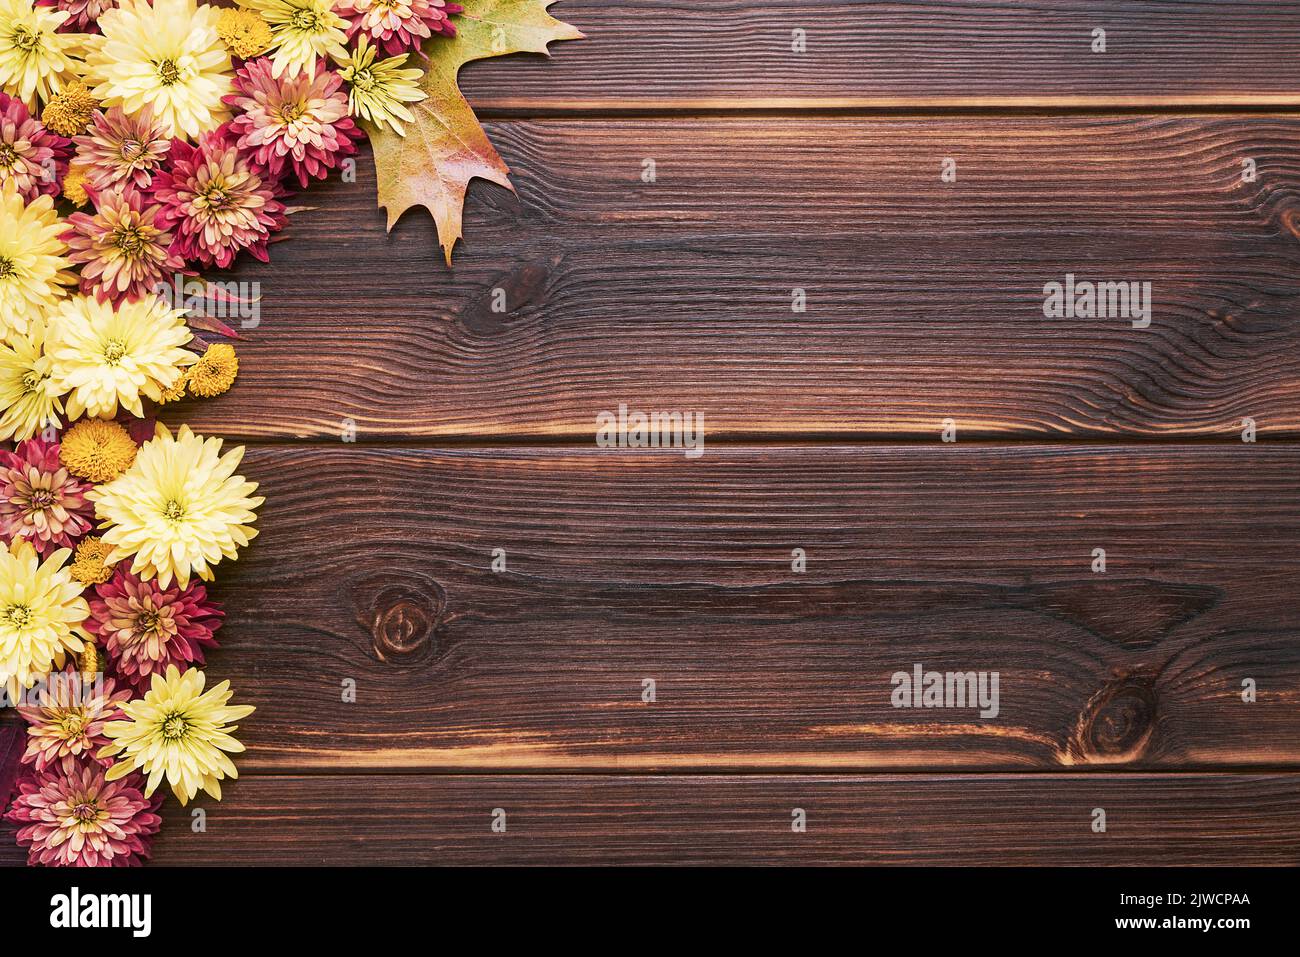 Autumn background. Colorful chrysanthemum flowers border on a dark wooden background. Top view, copy space for text Stock Photo